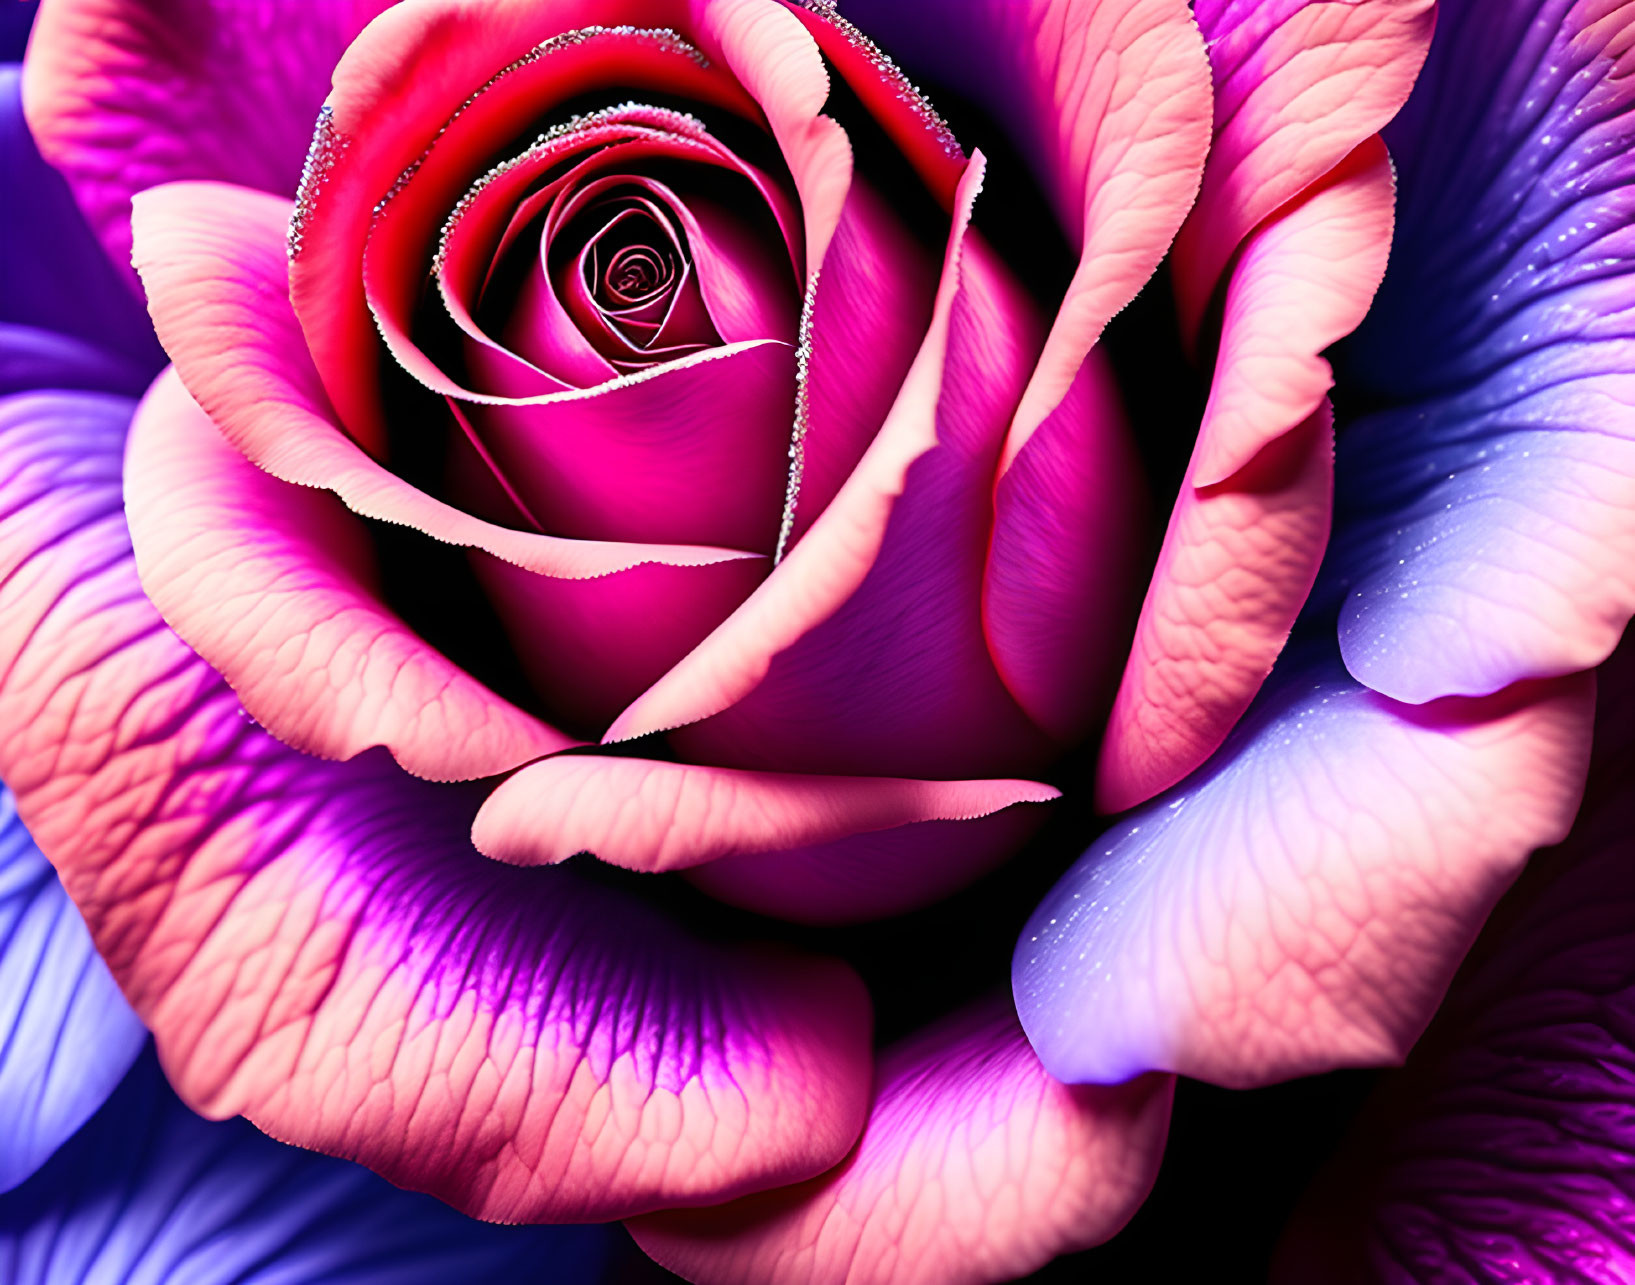 Vibrant pink and purple rose with delicate water droplets